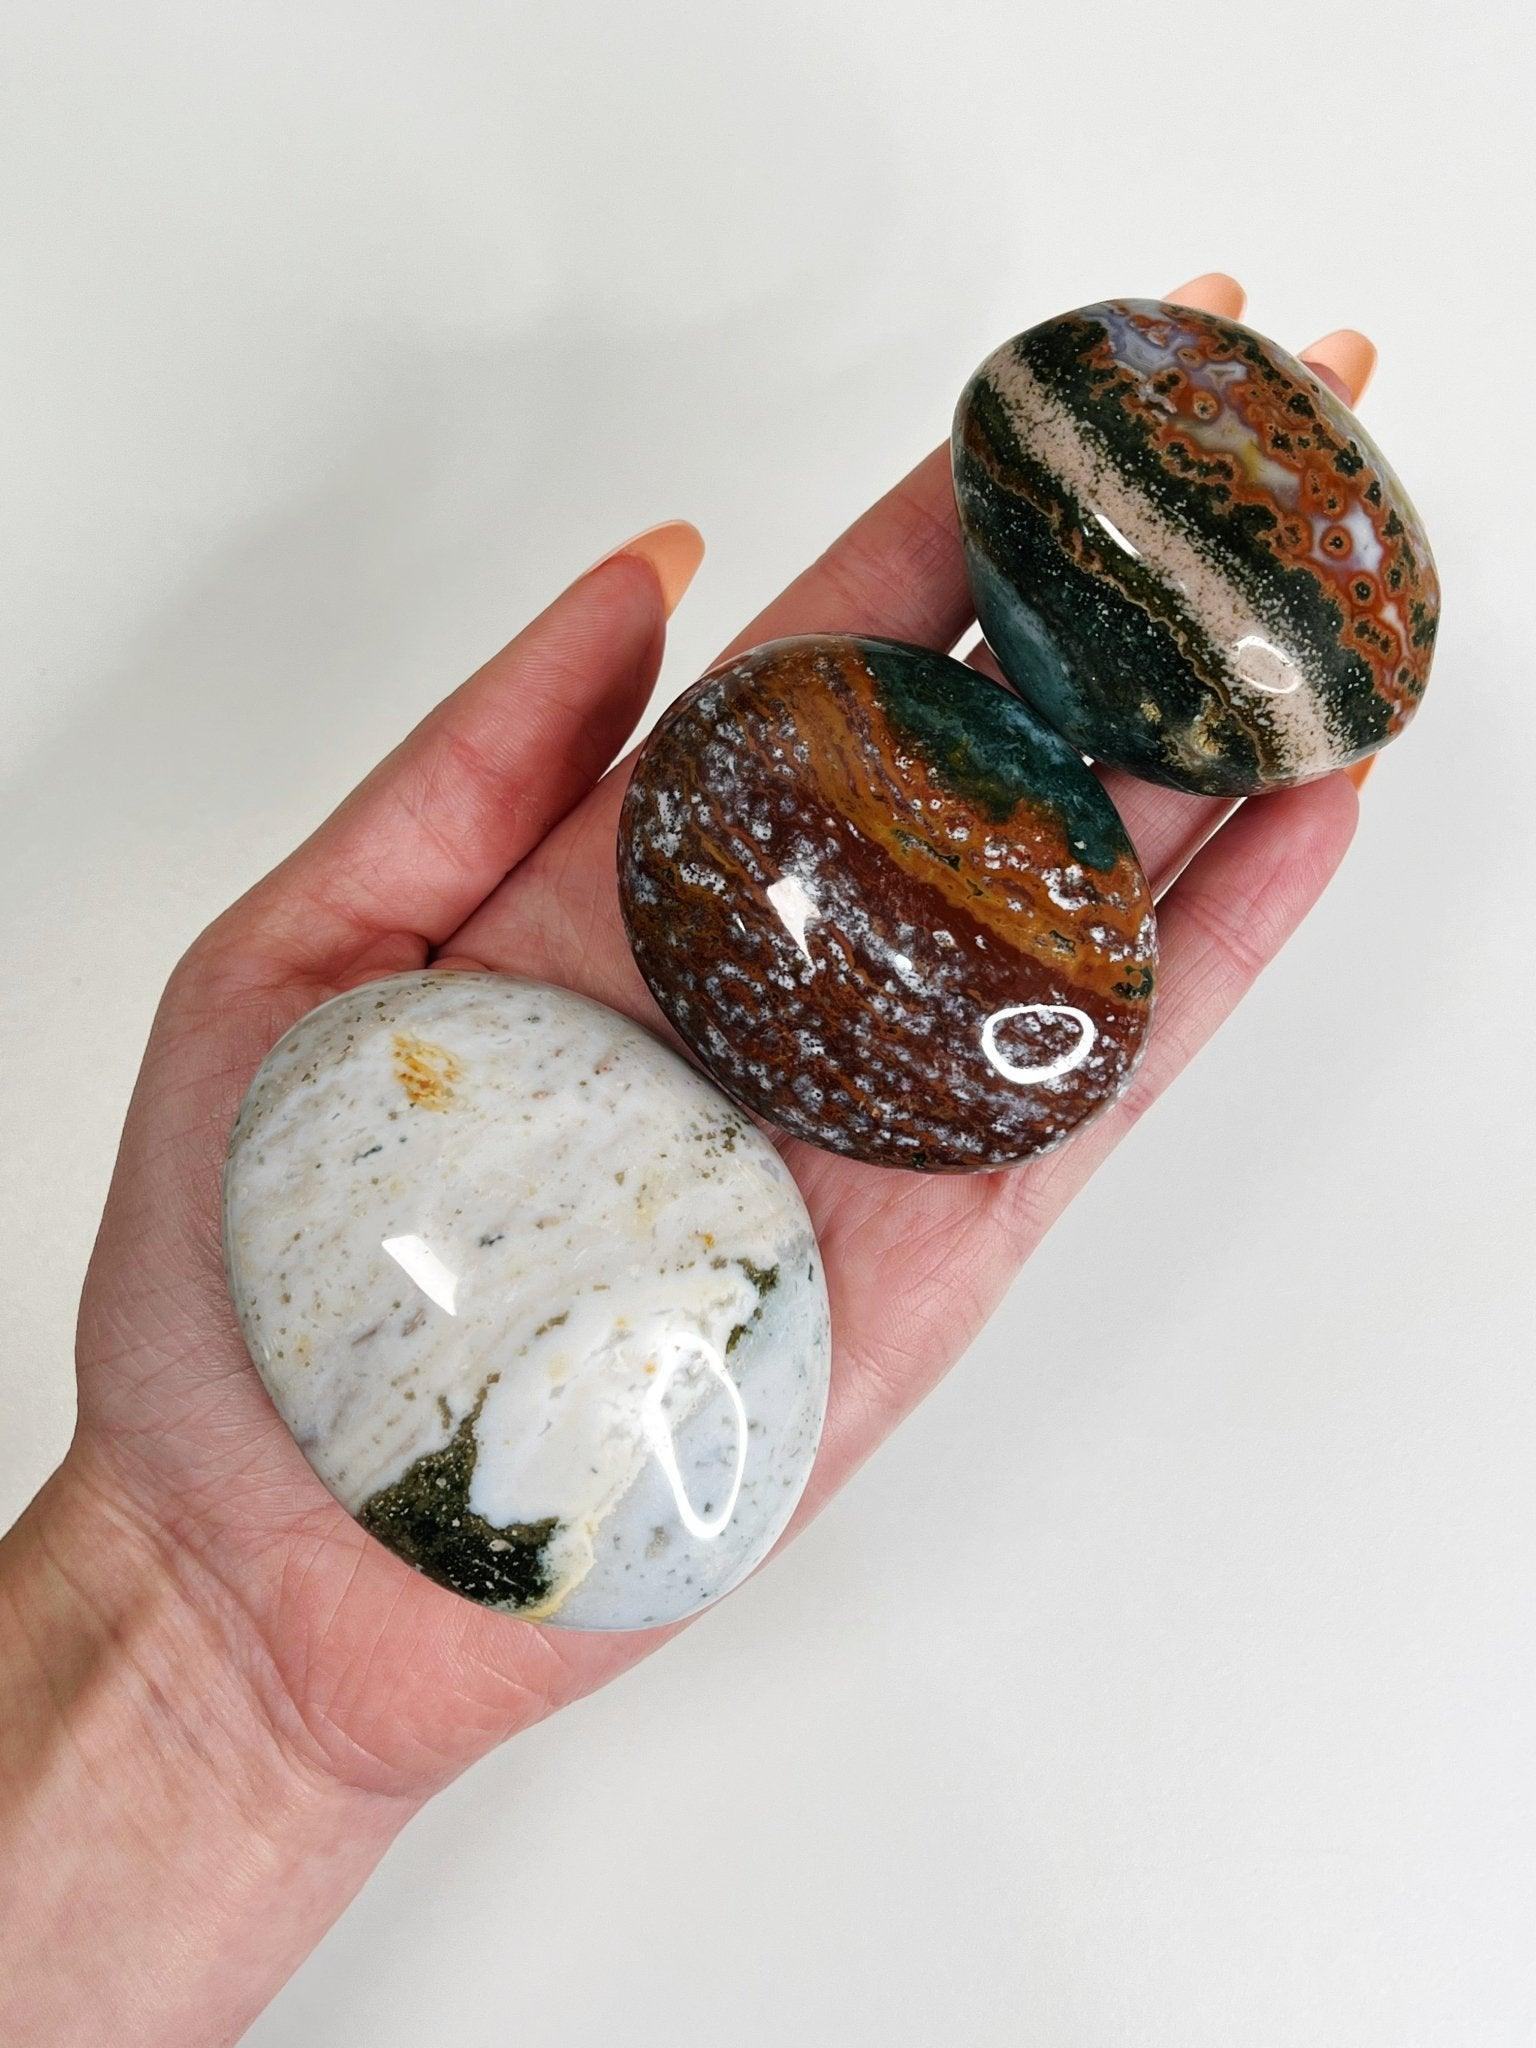 OCEAN JASPER PALM STONE - 33 bday, 444 sale, emotional support, end of year sale, holiday sale, new year sale, ocean jasper, palm, palm stone, palmstone, polished, spring equinox - The Mineral Maven